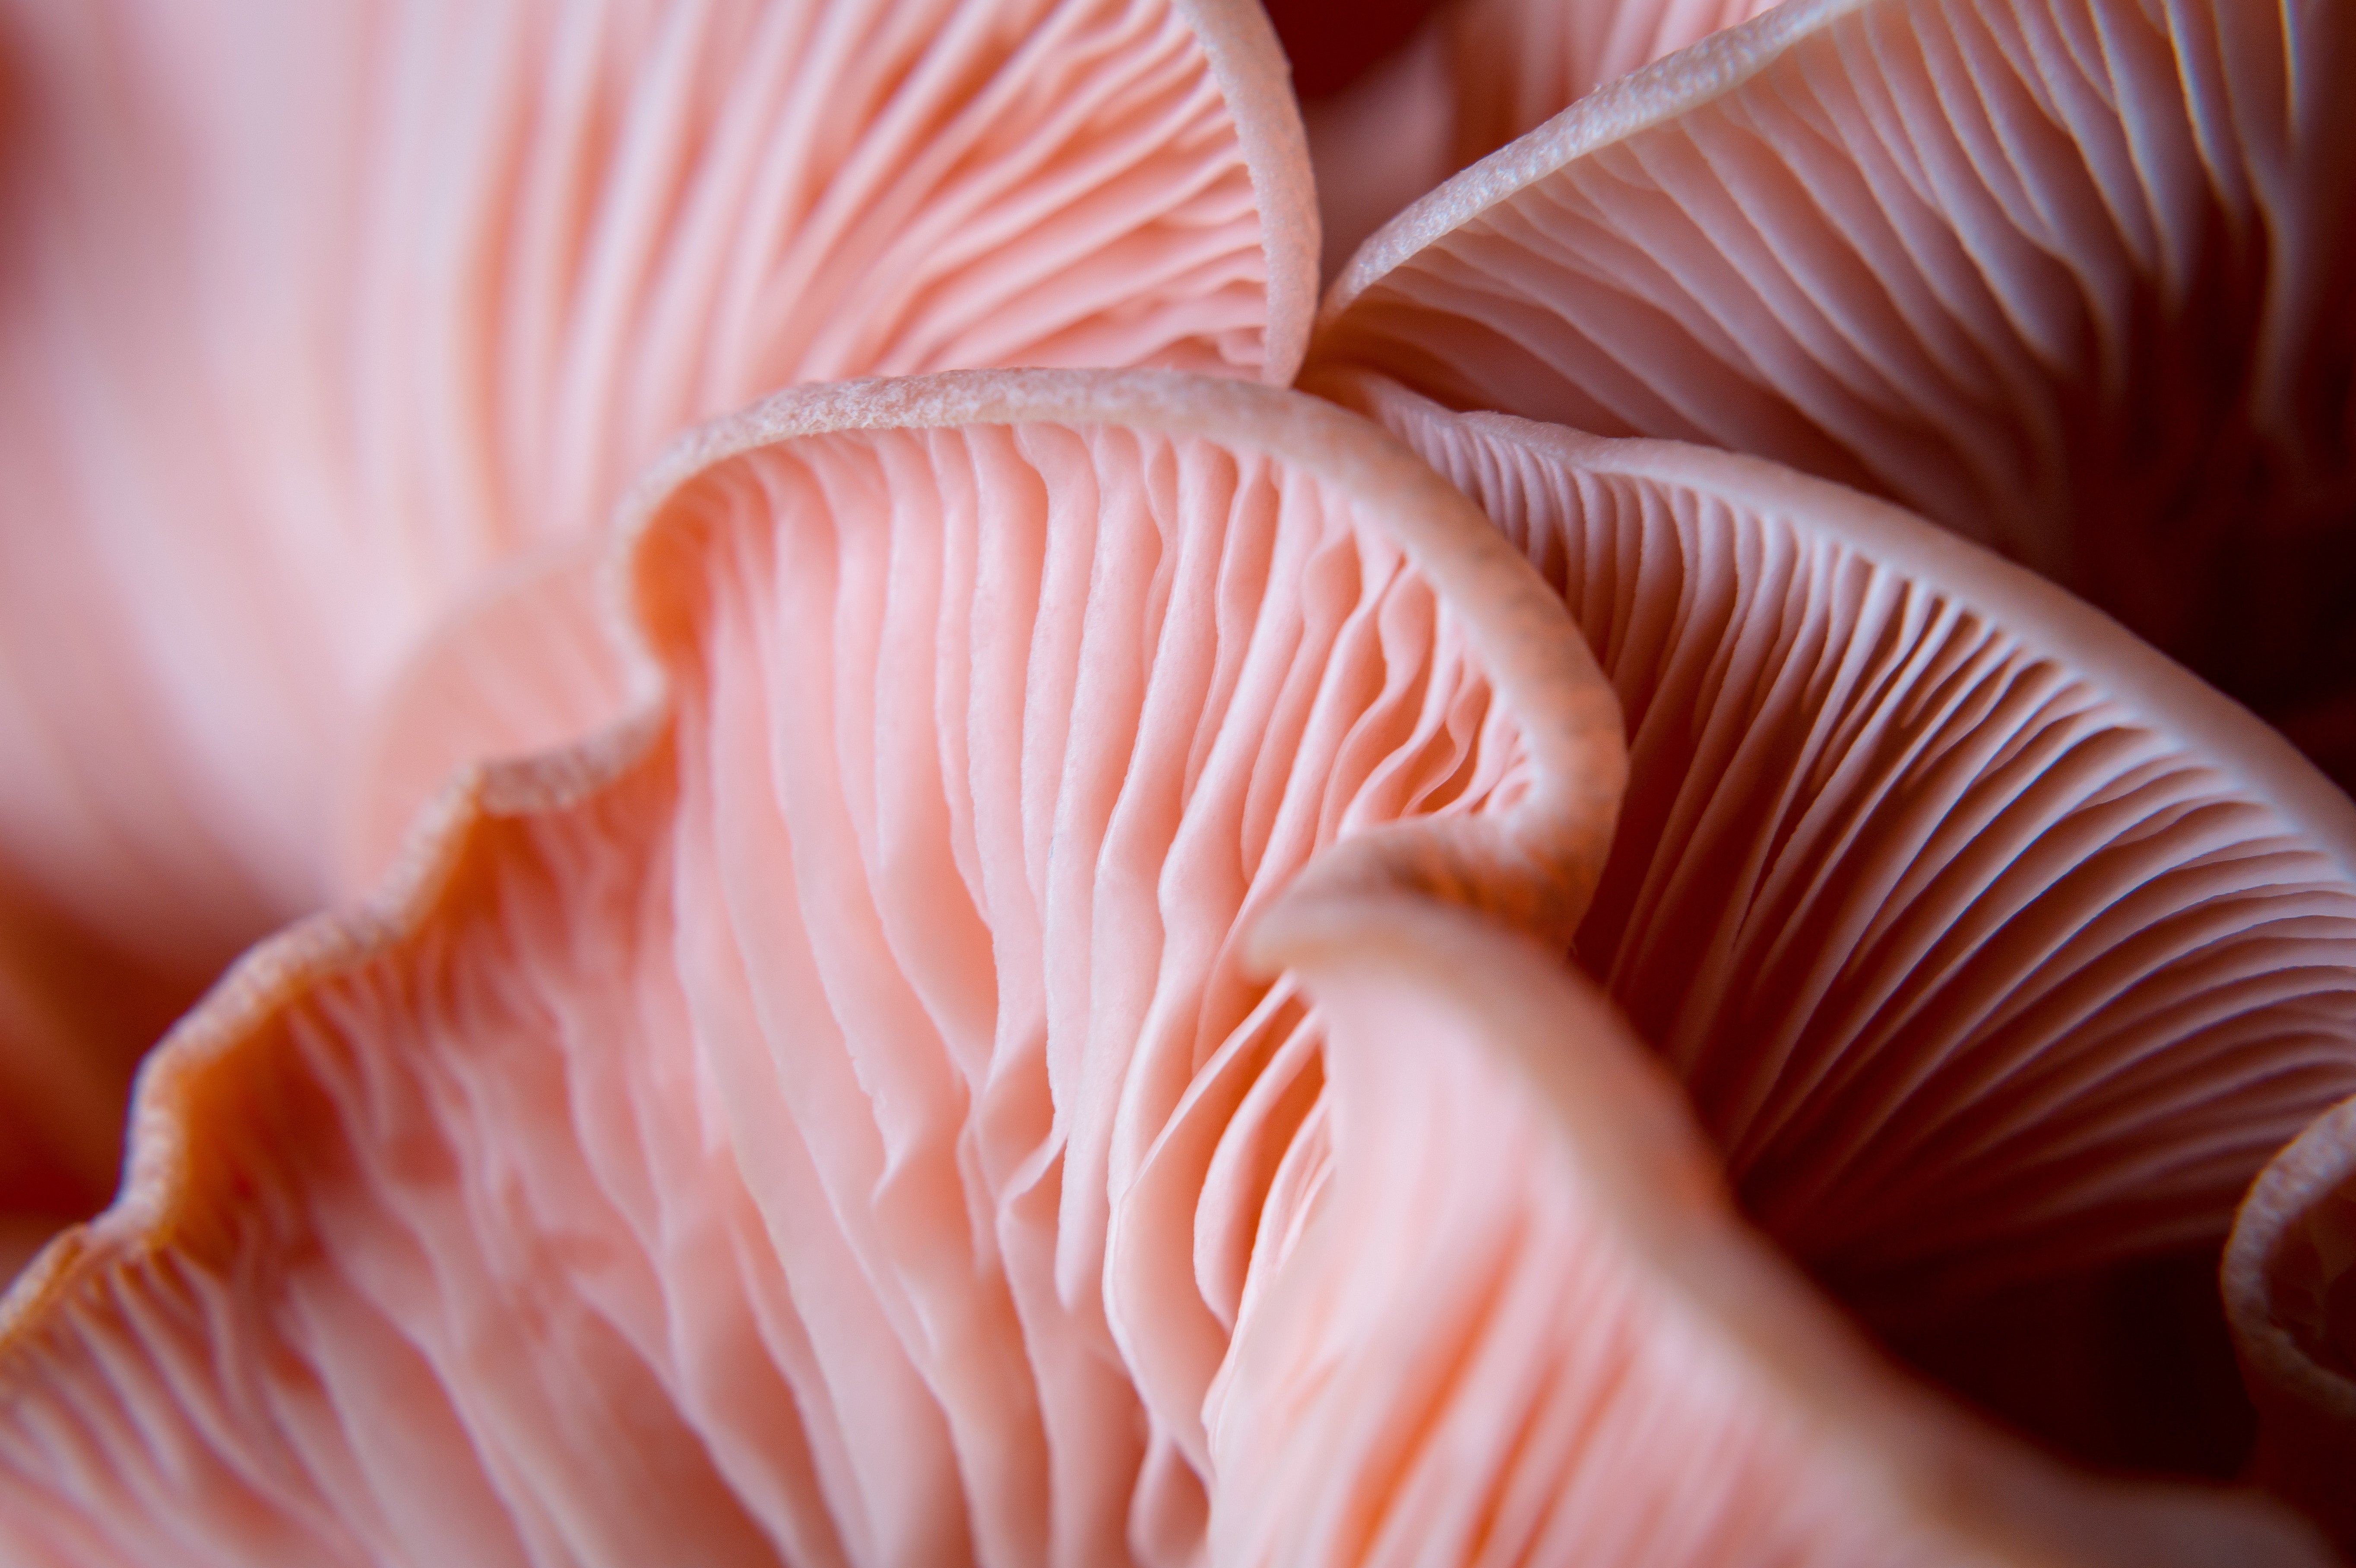 The World’s Healthiest Mushrooms for Stress Resilience, Immune Support, & More